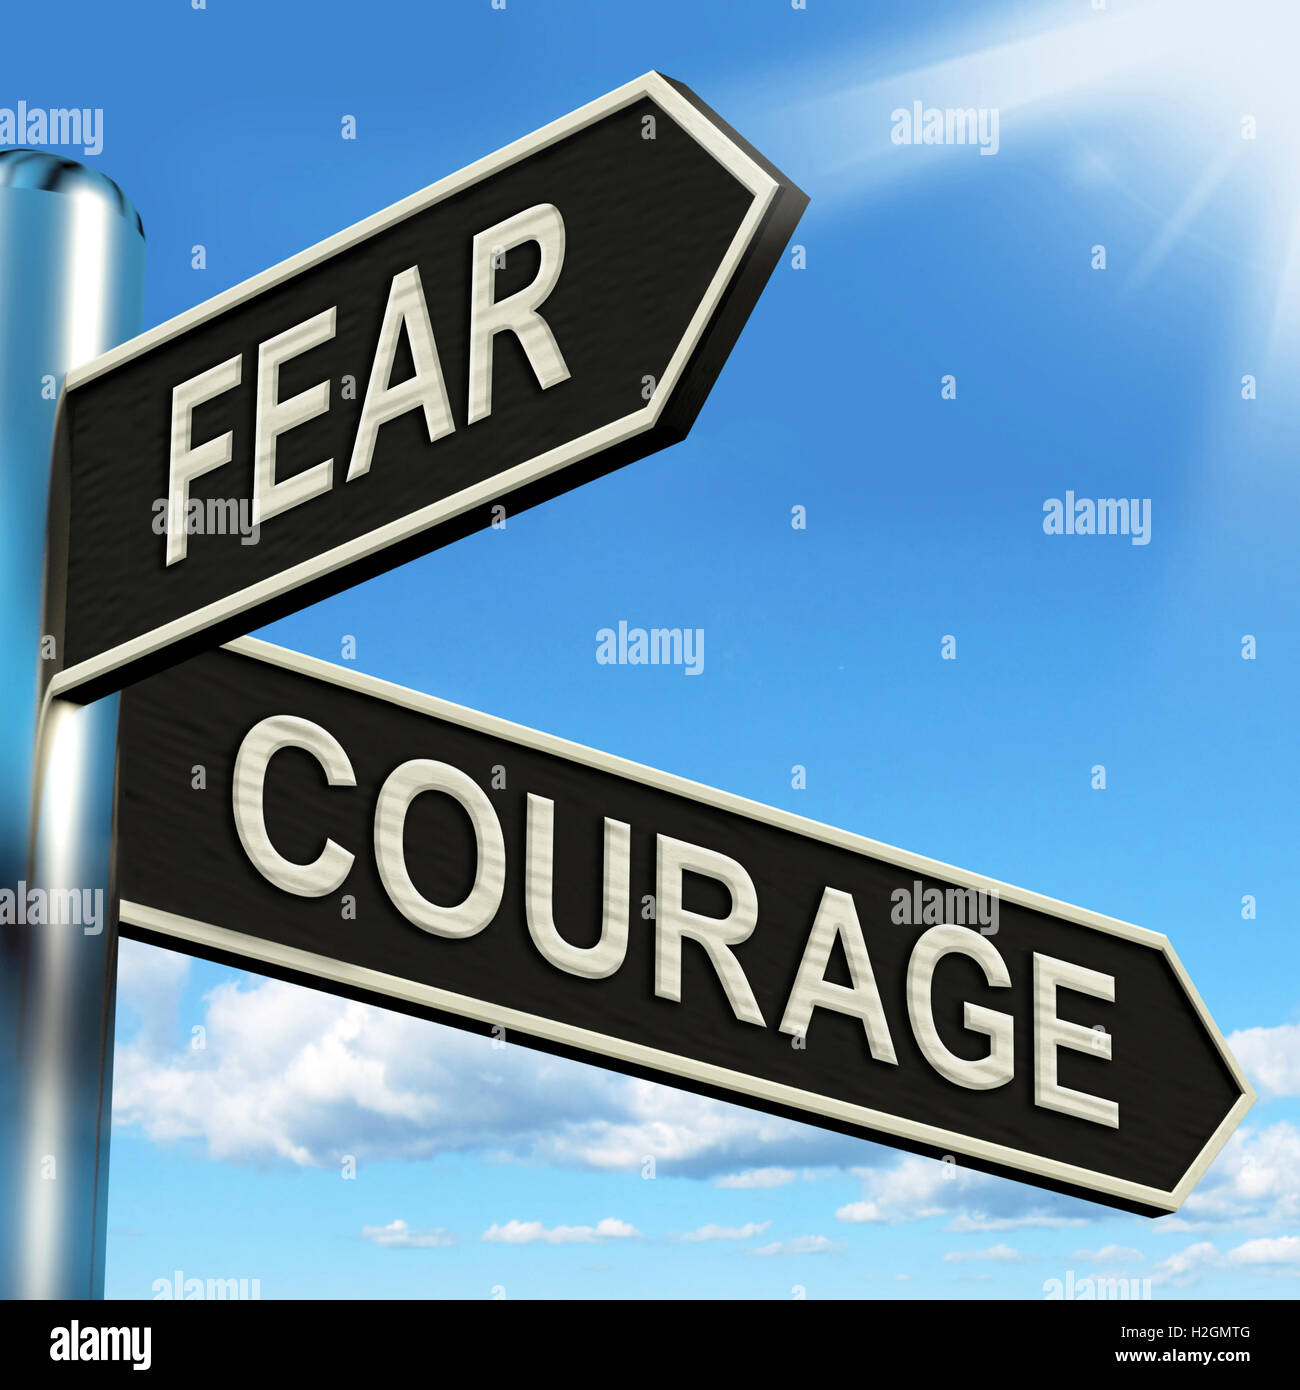 Fear Courage Signpost Shows Scared Or Courageous Stock Photo